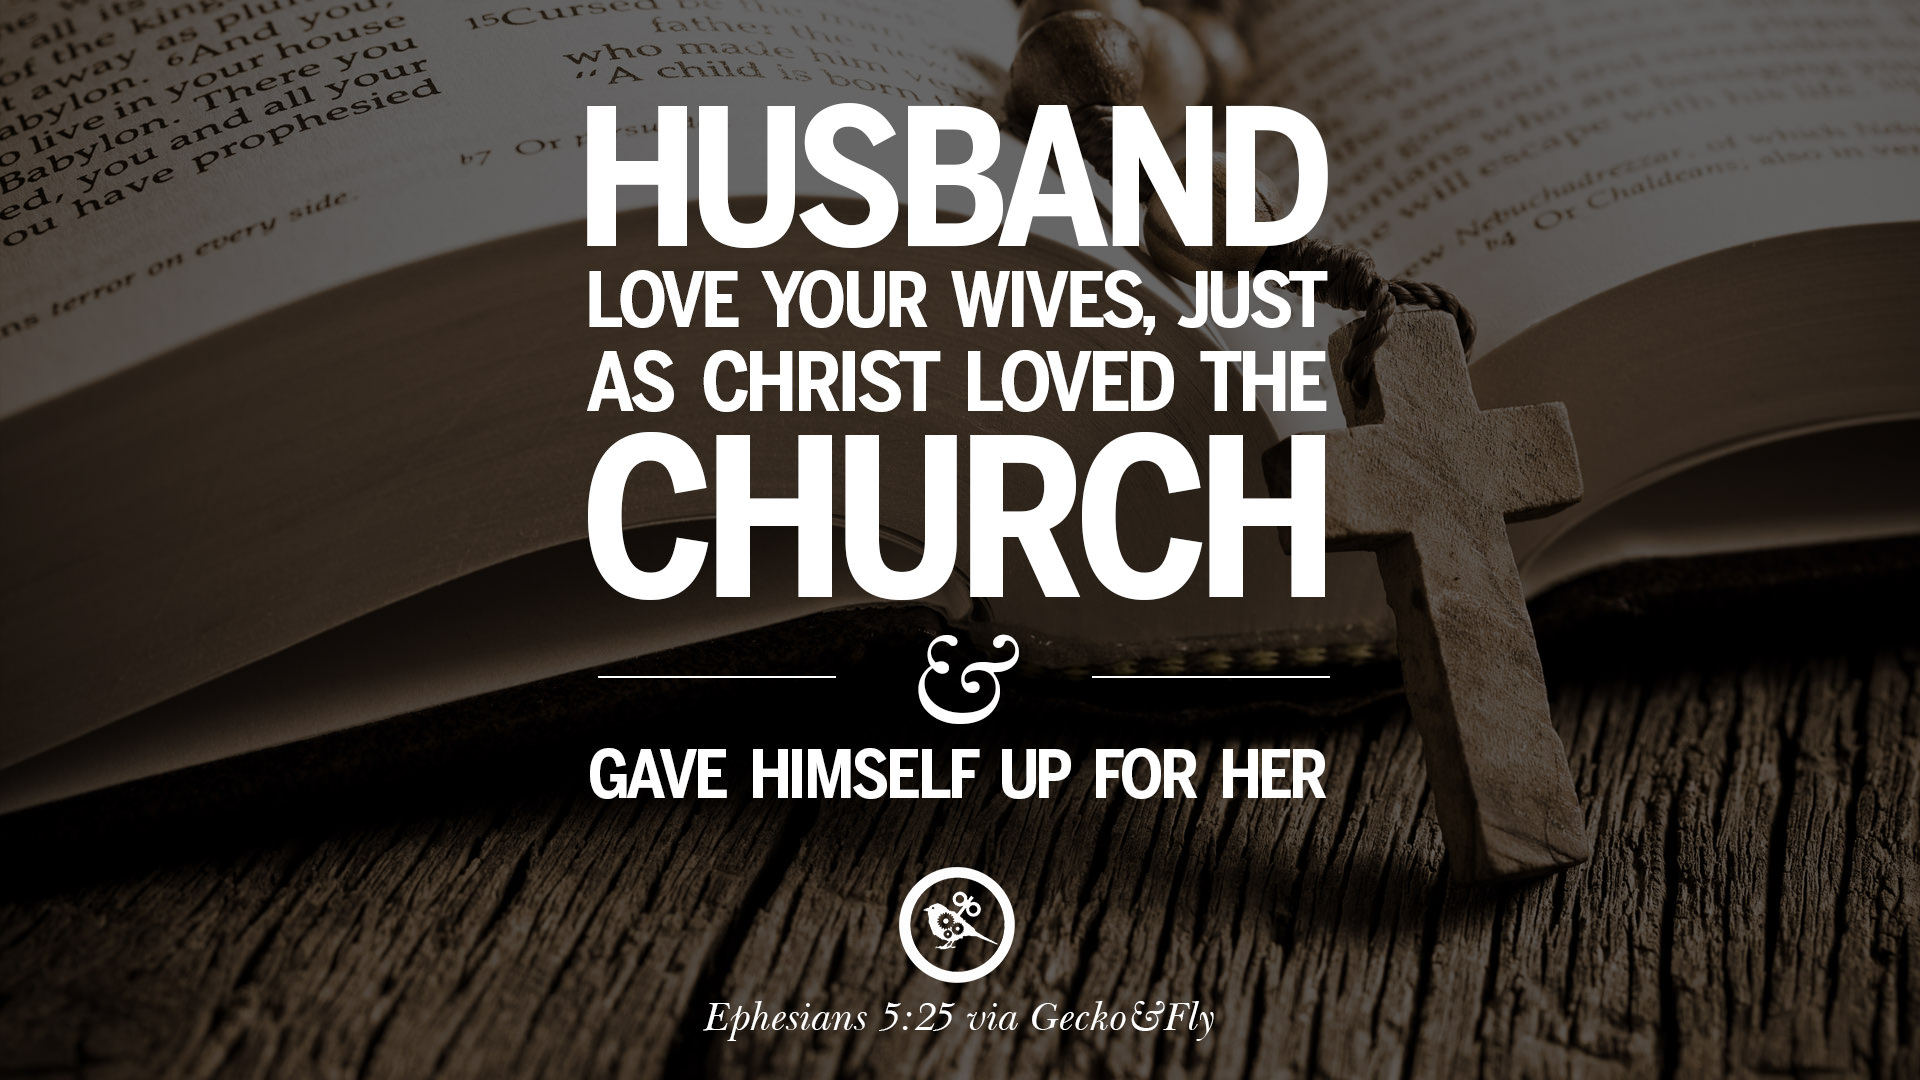 7 Bible Verses About Love Relationships Marriage Family and More